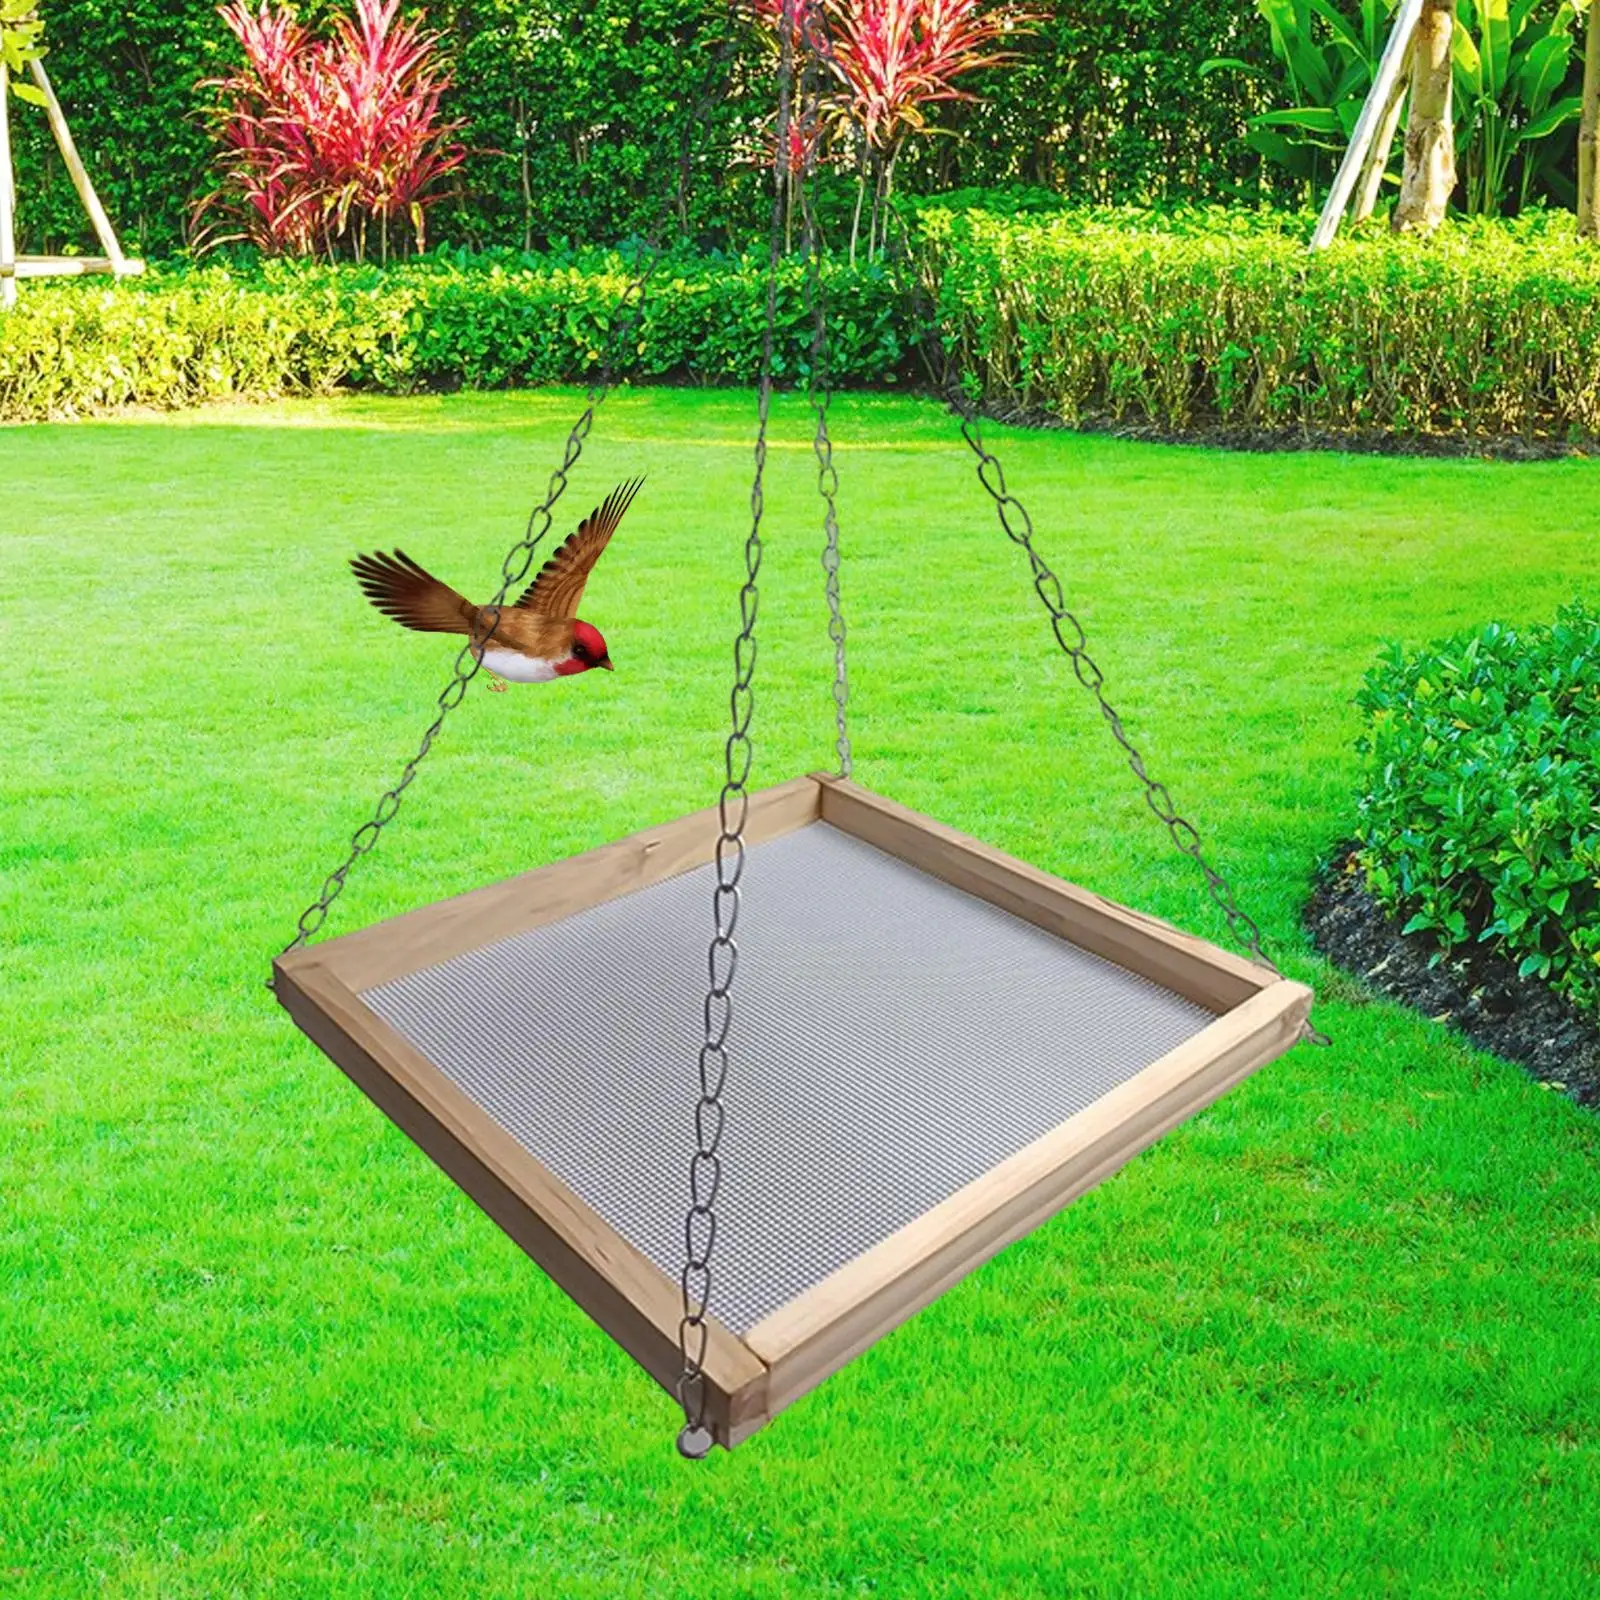 Hanging Bird Feeder Dish Strong Chains Seed Tray Food Holder Wooden Frame for Patio Outdoor Yard Outside Attracting Birds